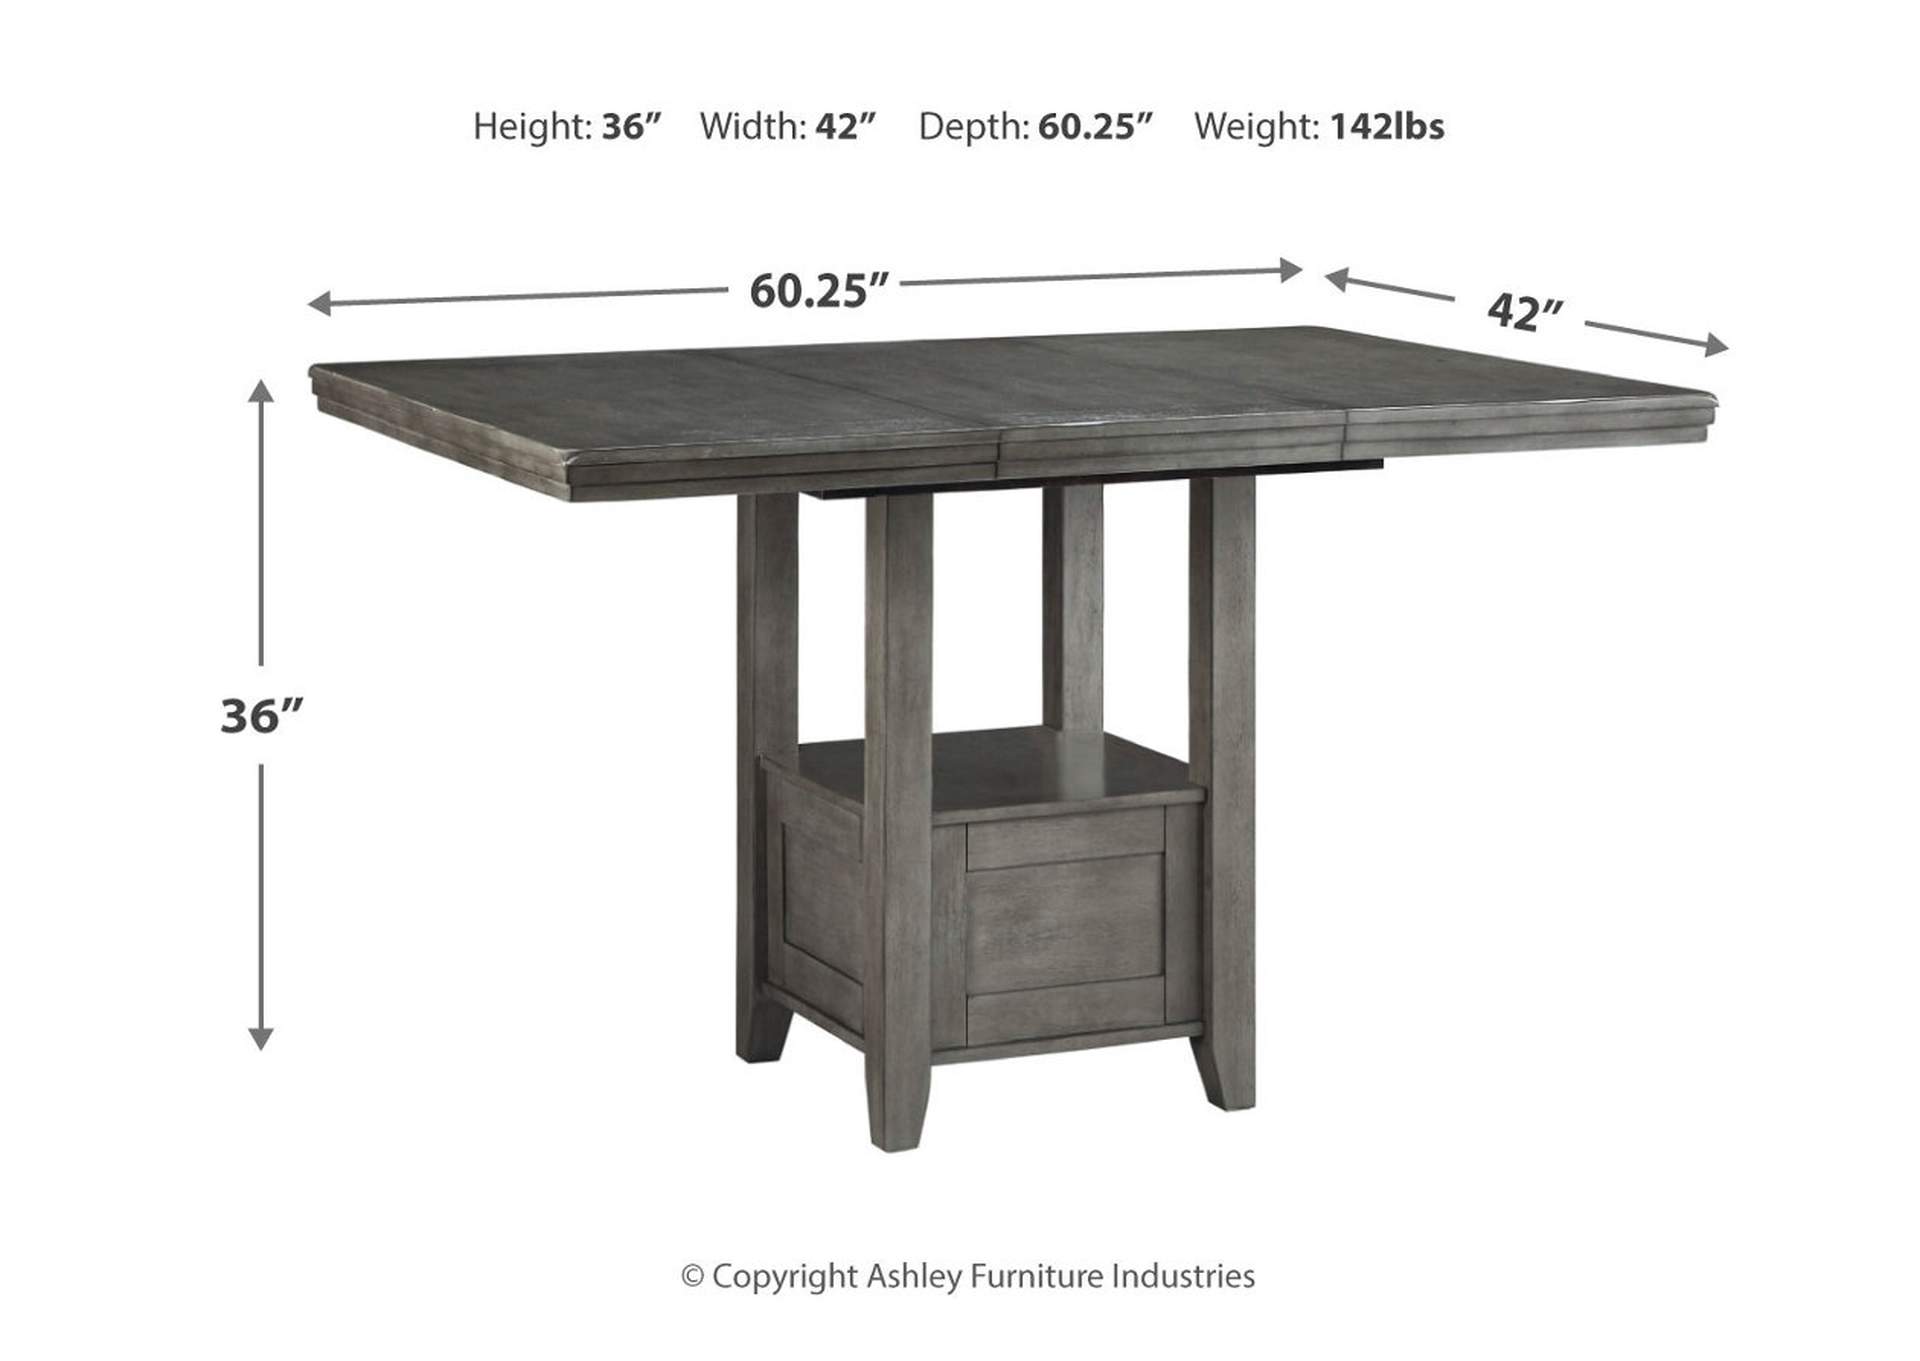 Hallanden Counter Height Dining Table and 6 Barstools with Storage,Signature Design By Ashley